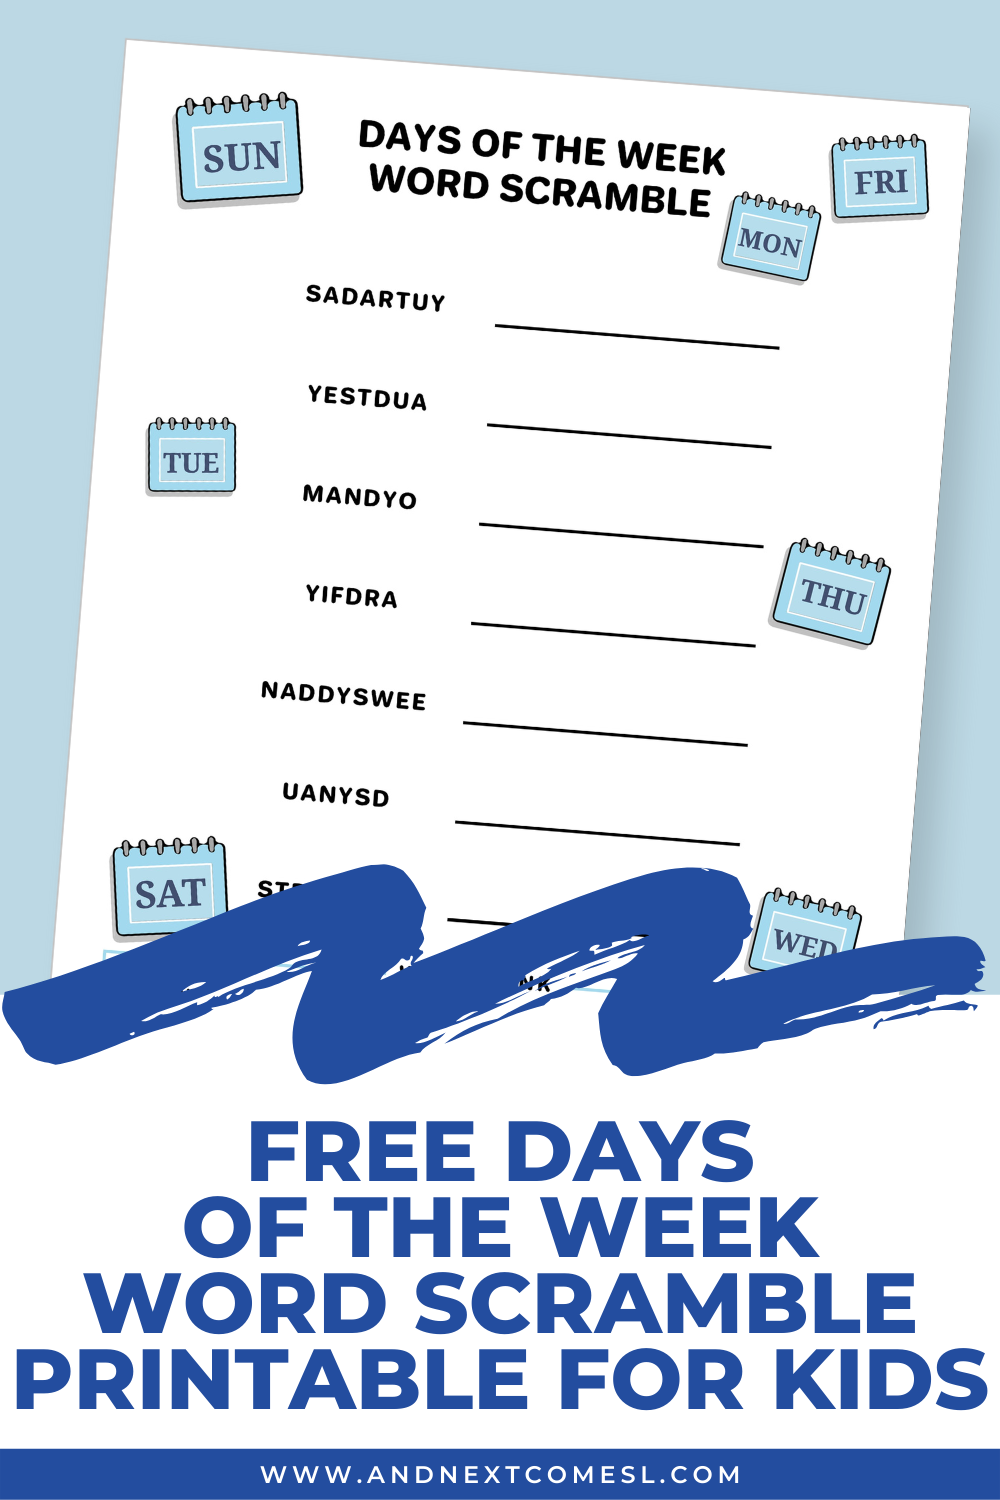 Free printable days of the week word scramble game for kids with answers